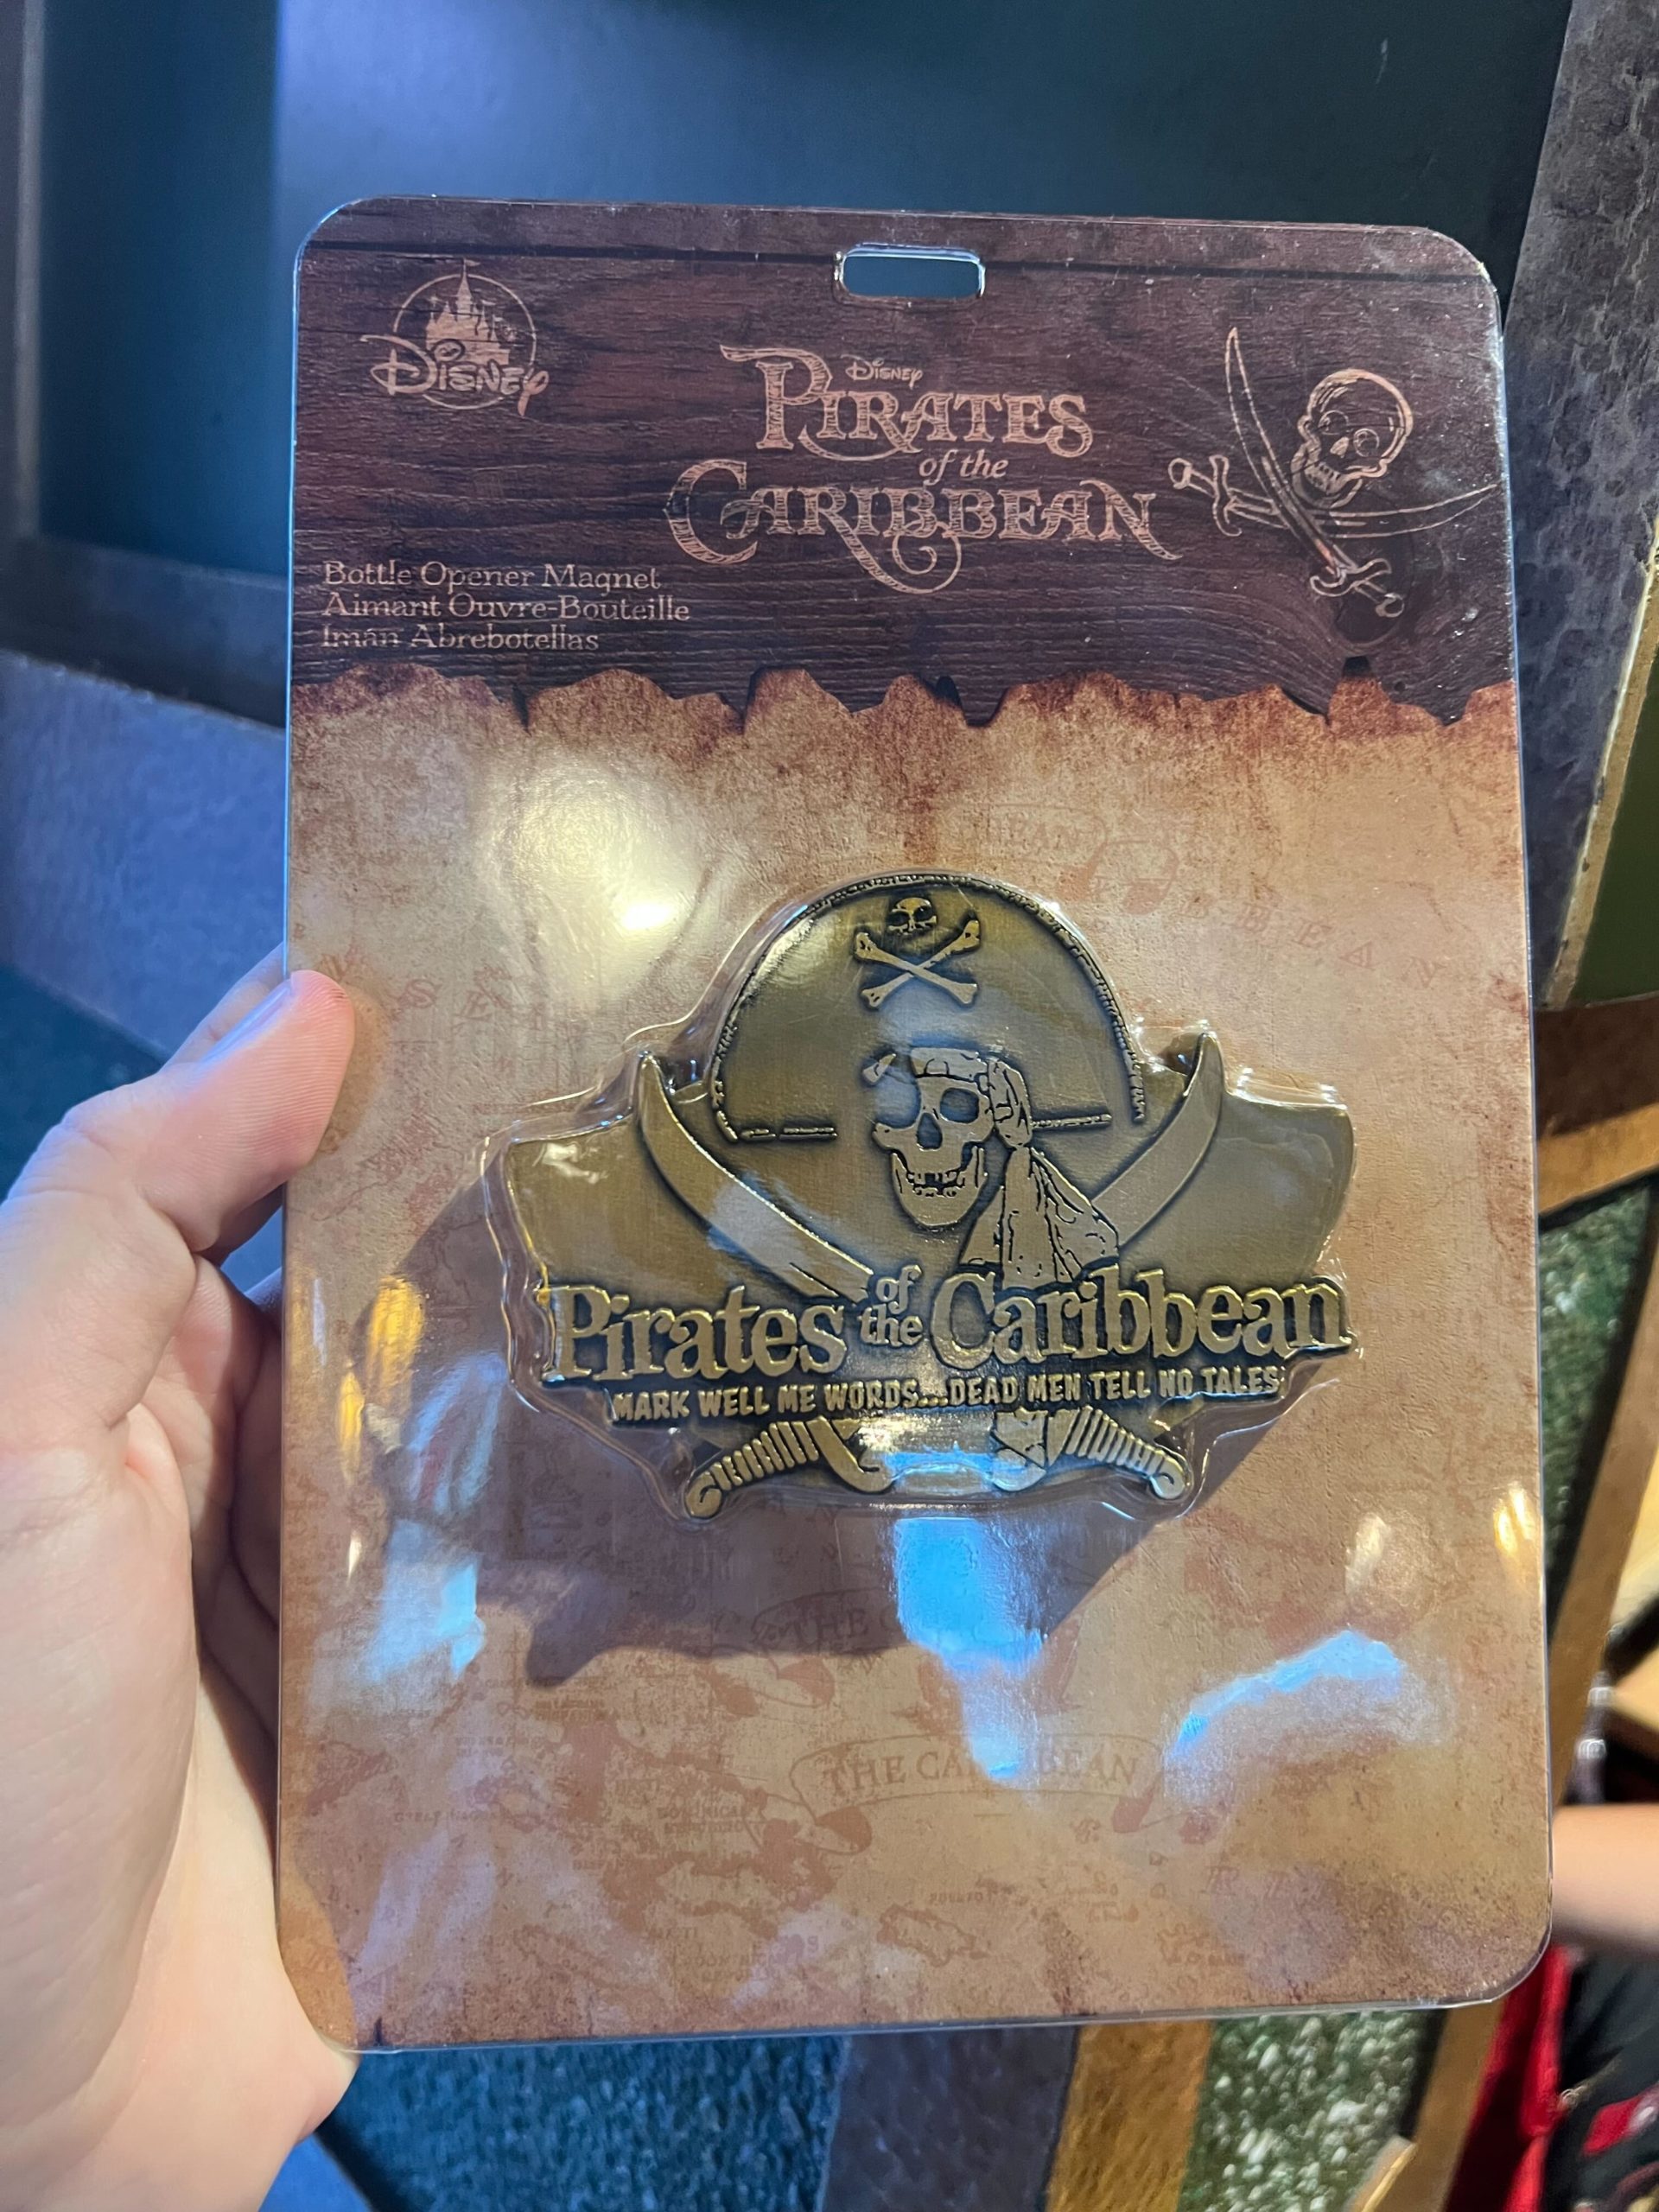 DL Pirates of the Caribbean merchandise bottle opener magnet 2 scaled